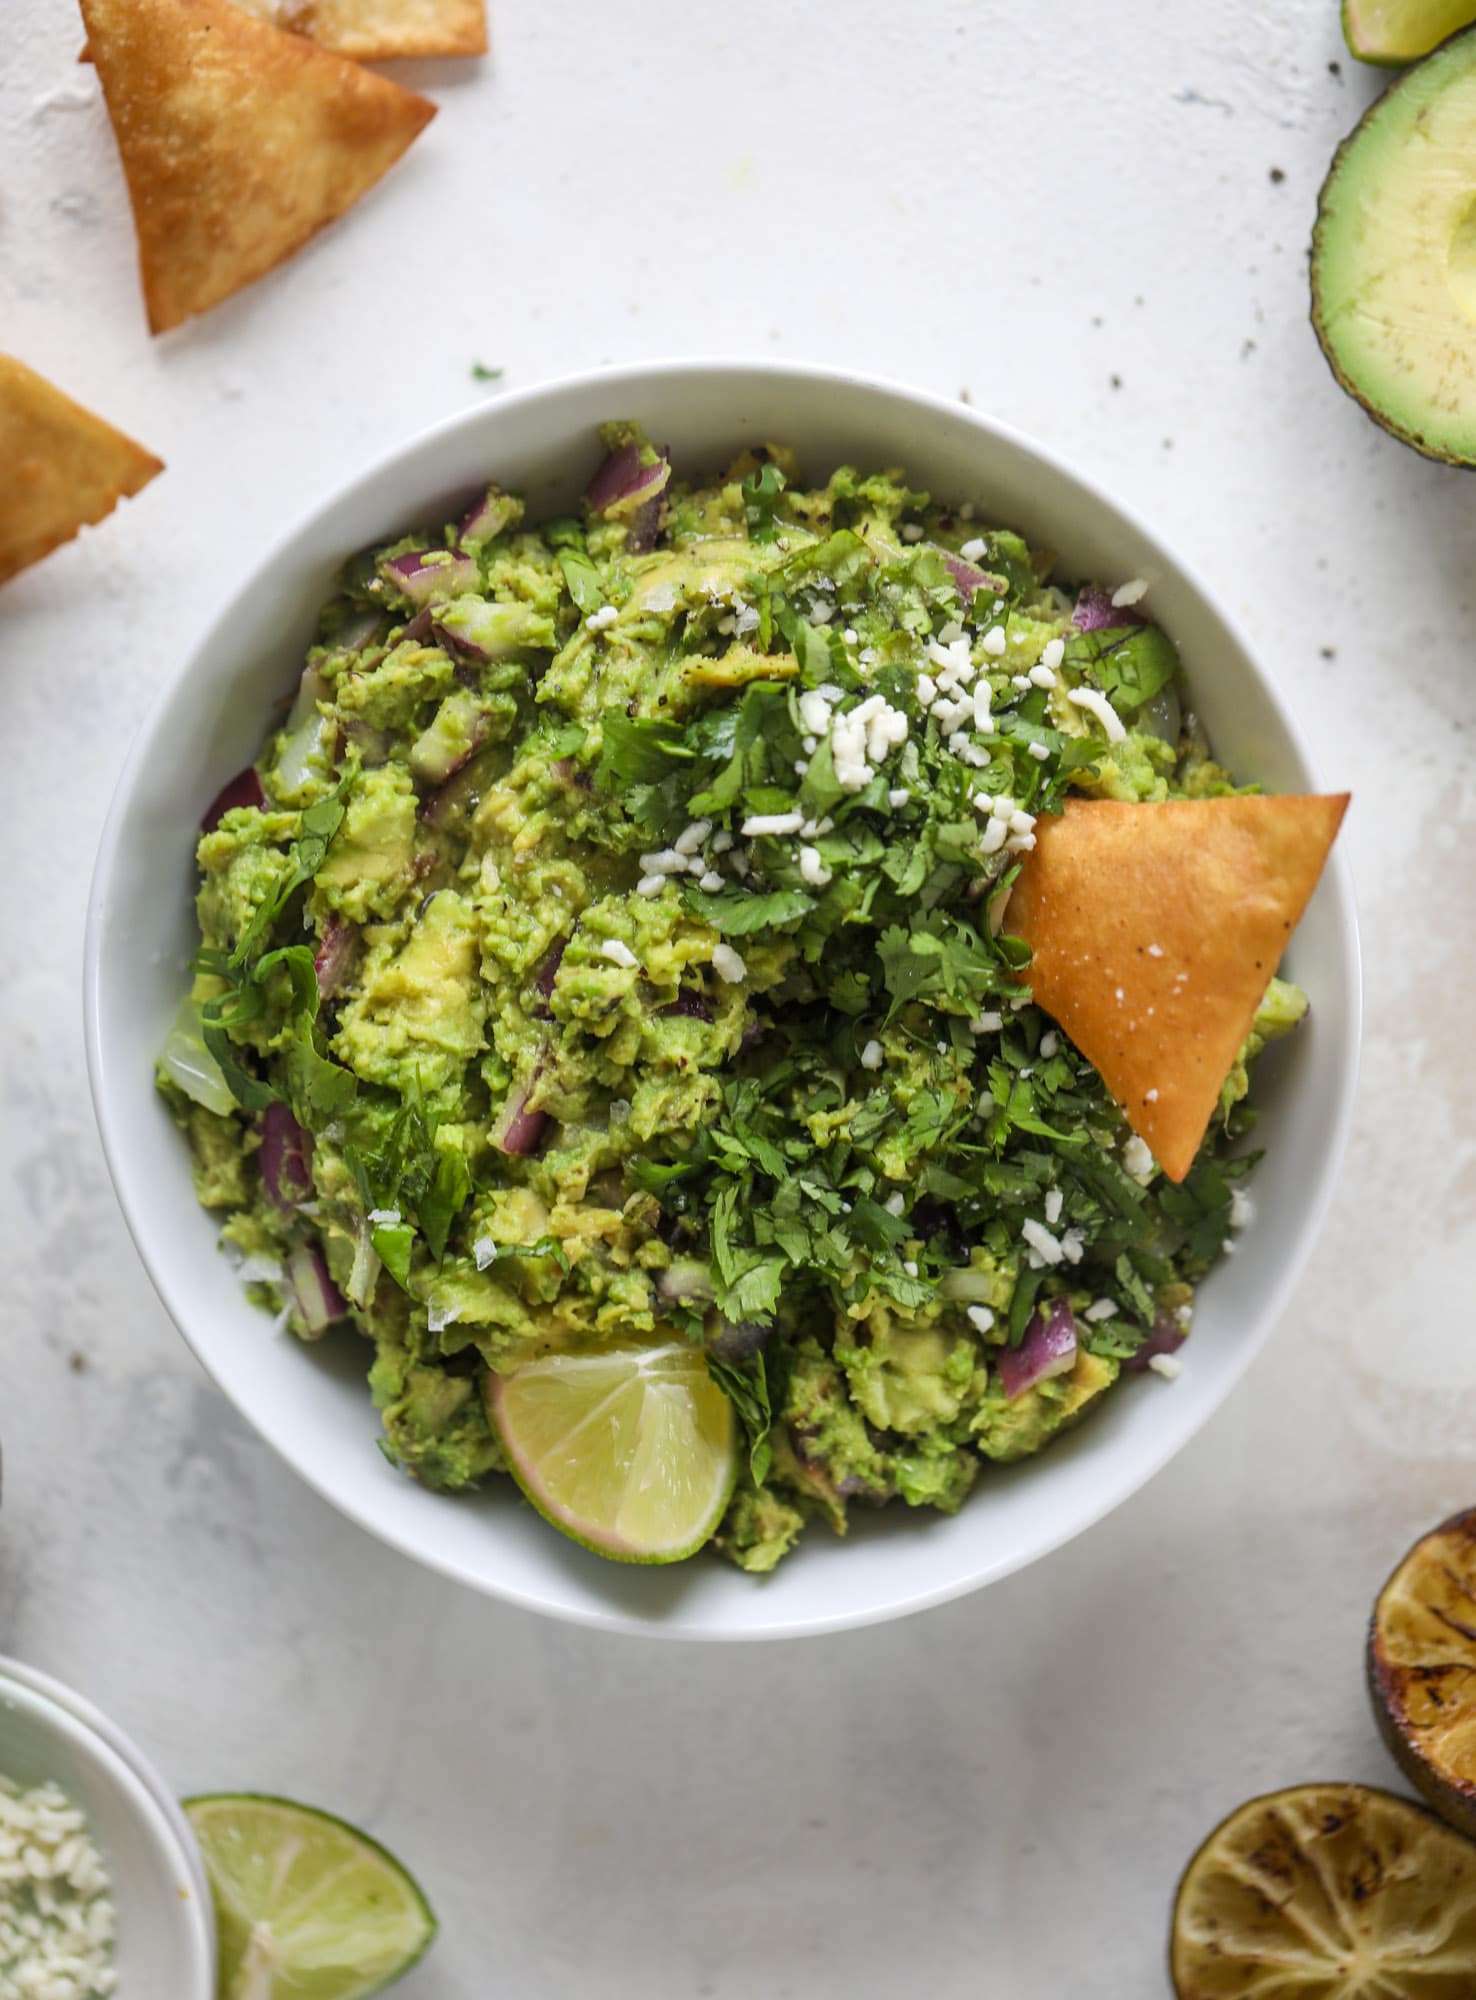 Take your guac up a notch by grilling the ingredients! This grilled guacamole is smoky and flavorful and just begging for all the chips.